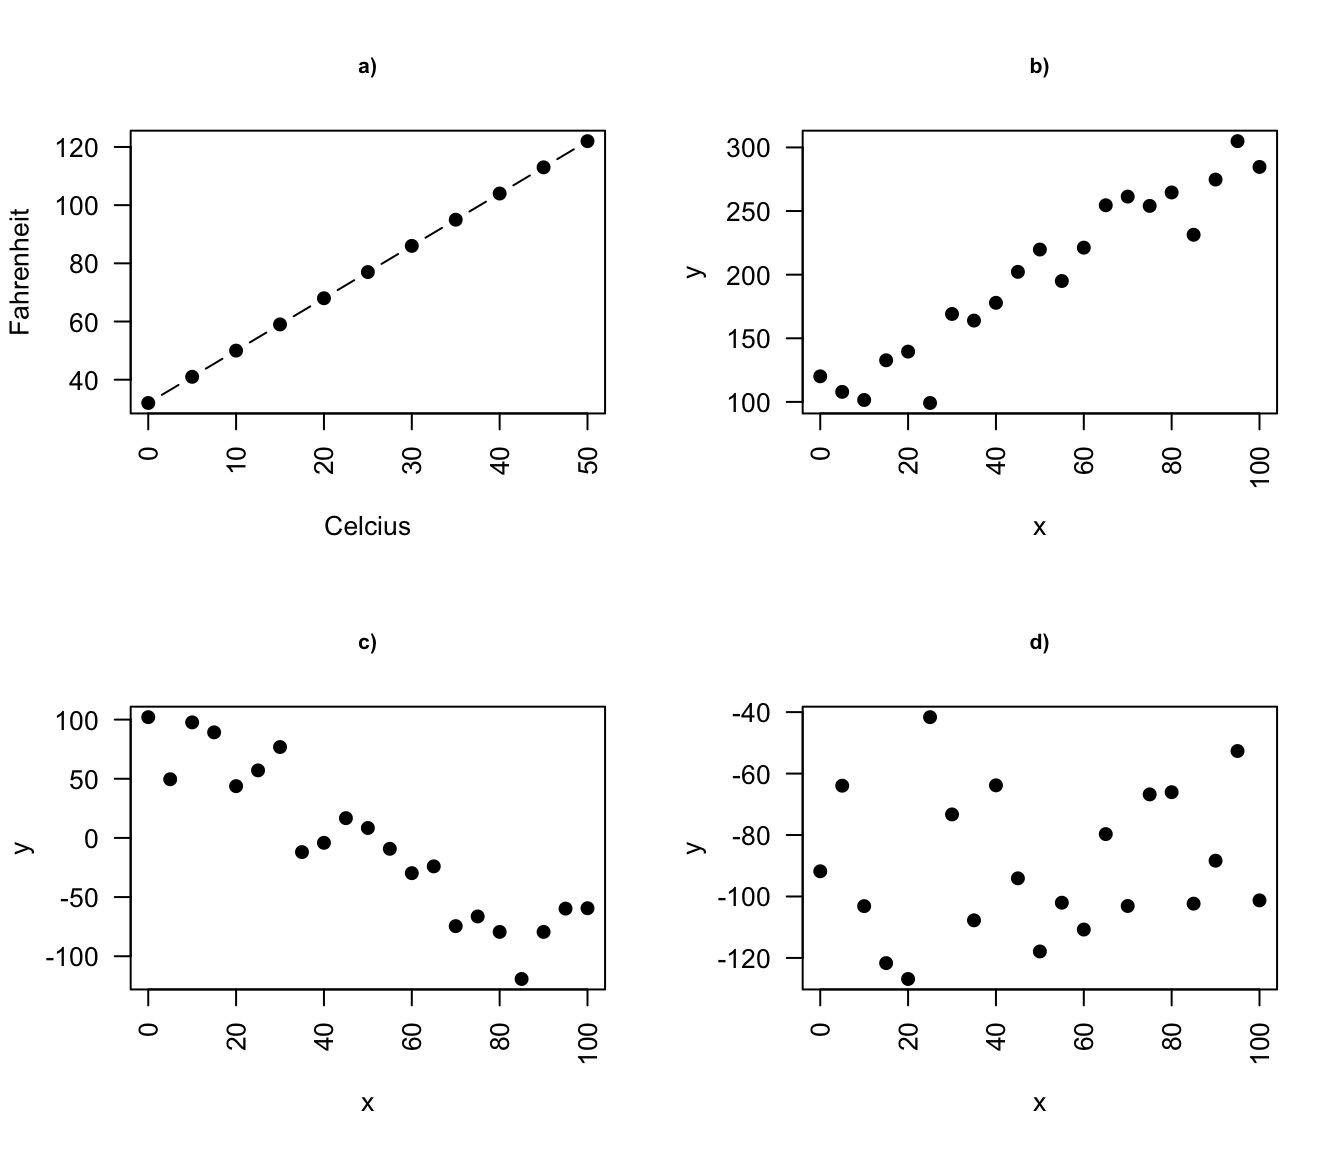 Deterministic vs. statistical relationship: a) deterministic: equation exactly describes the relationship between the two variables e.g. Ferenheit and Celcius relationship ; b) statistical relationship between $x$ and $y$ is not perfect (increasing relationship), c)  statistical relationship between $x$ and $y$ is not perfect (decreasing relationship), d) random signal